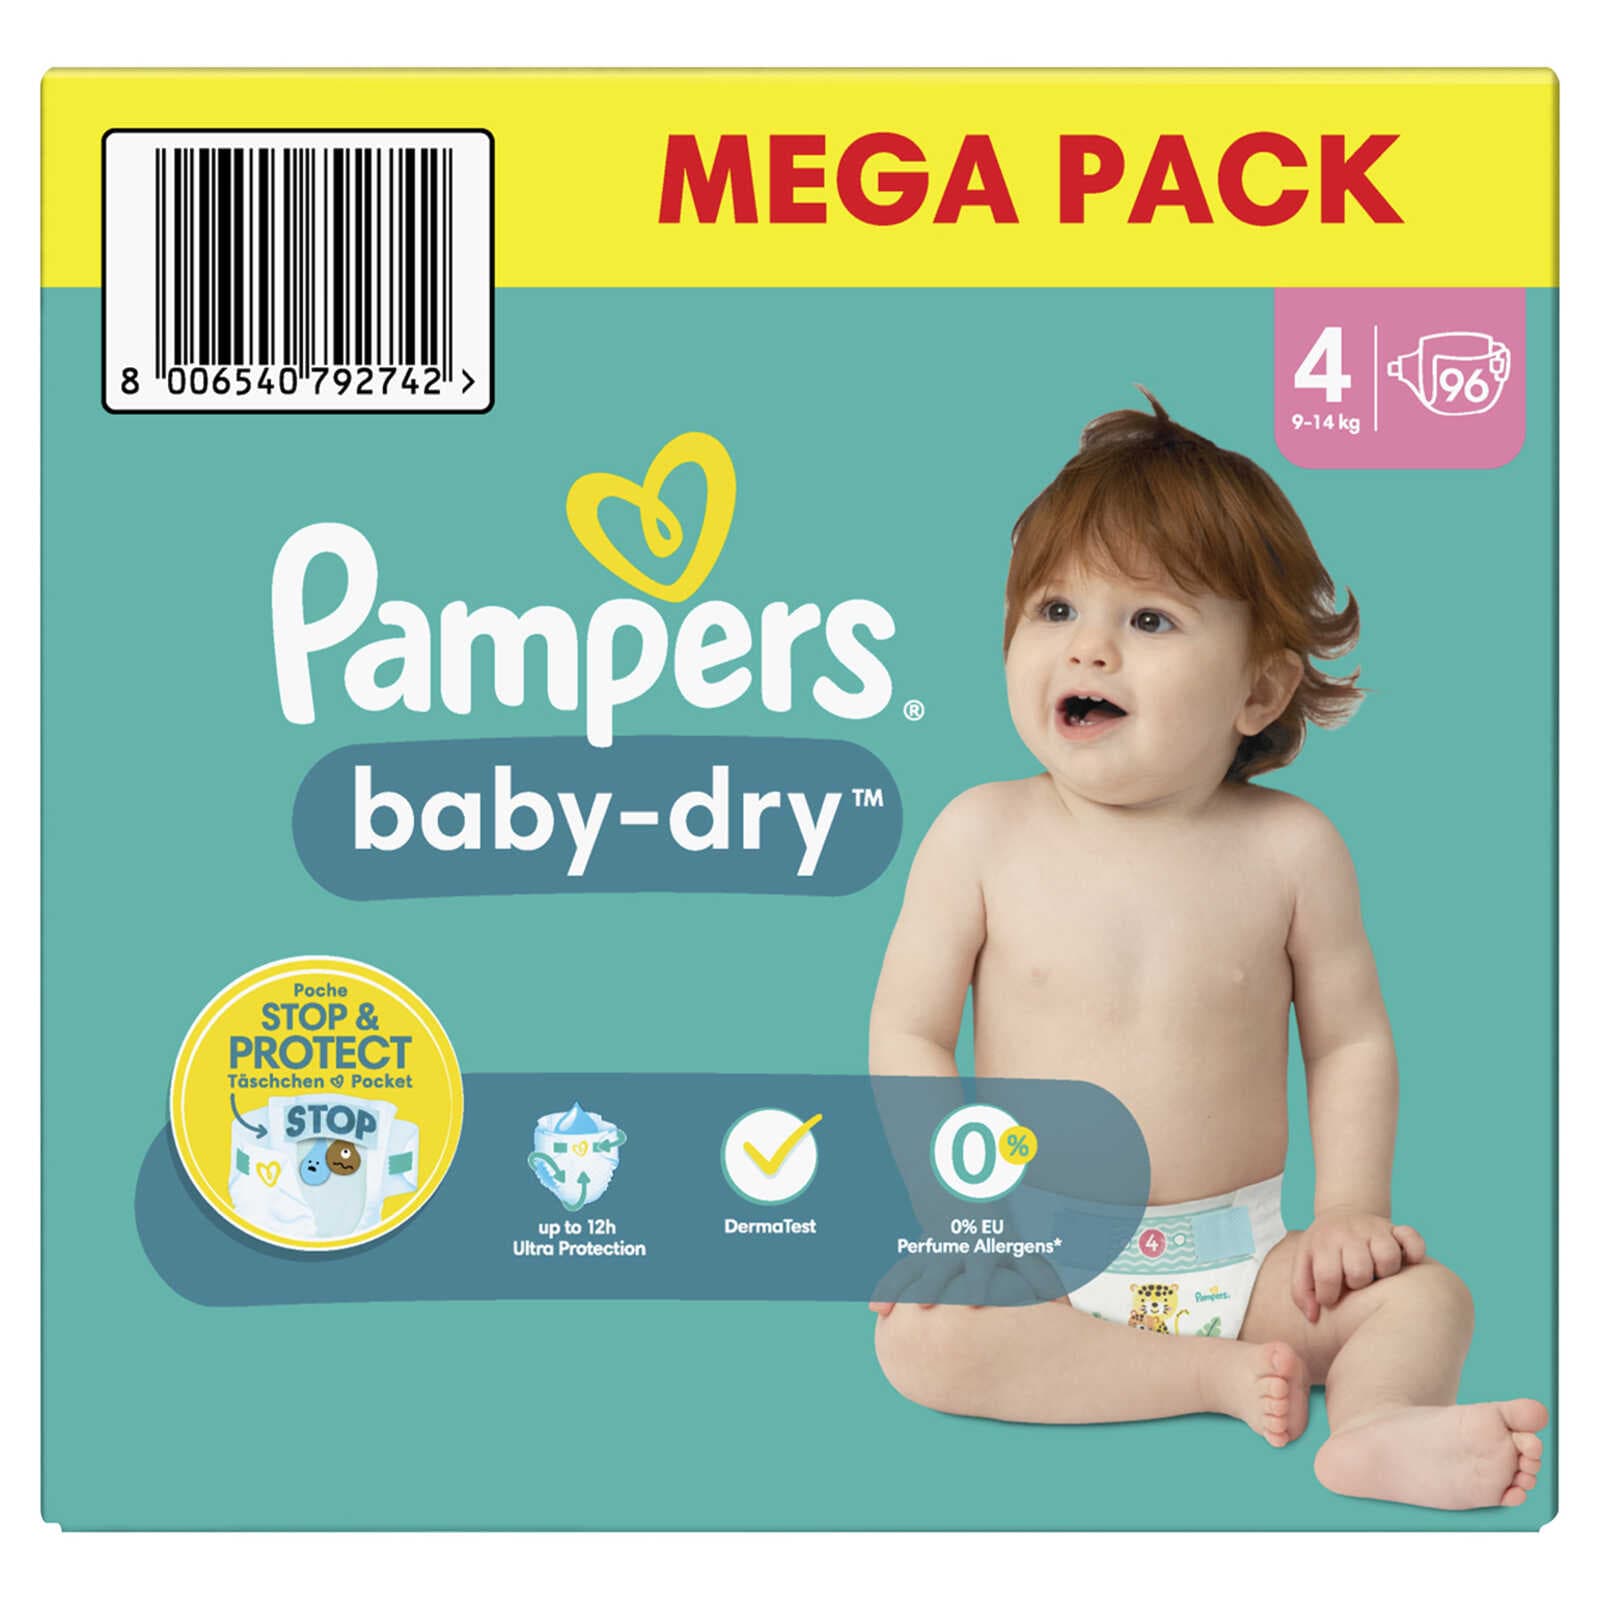 inzet Sada pizza Pampers | Baby Dry | Luiers | Maat 4 | Mega pack | 96 st | Delhaize